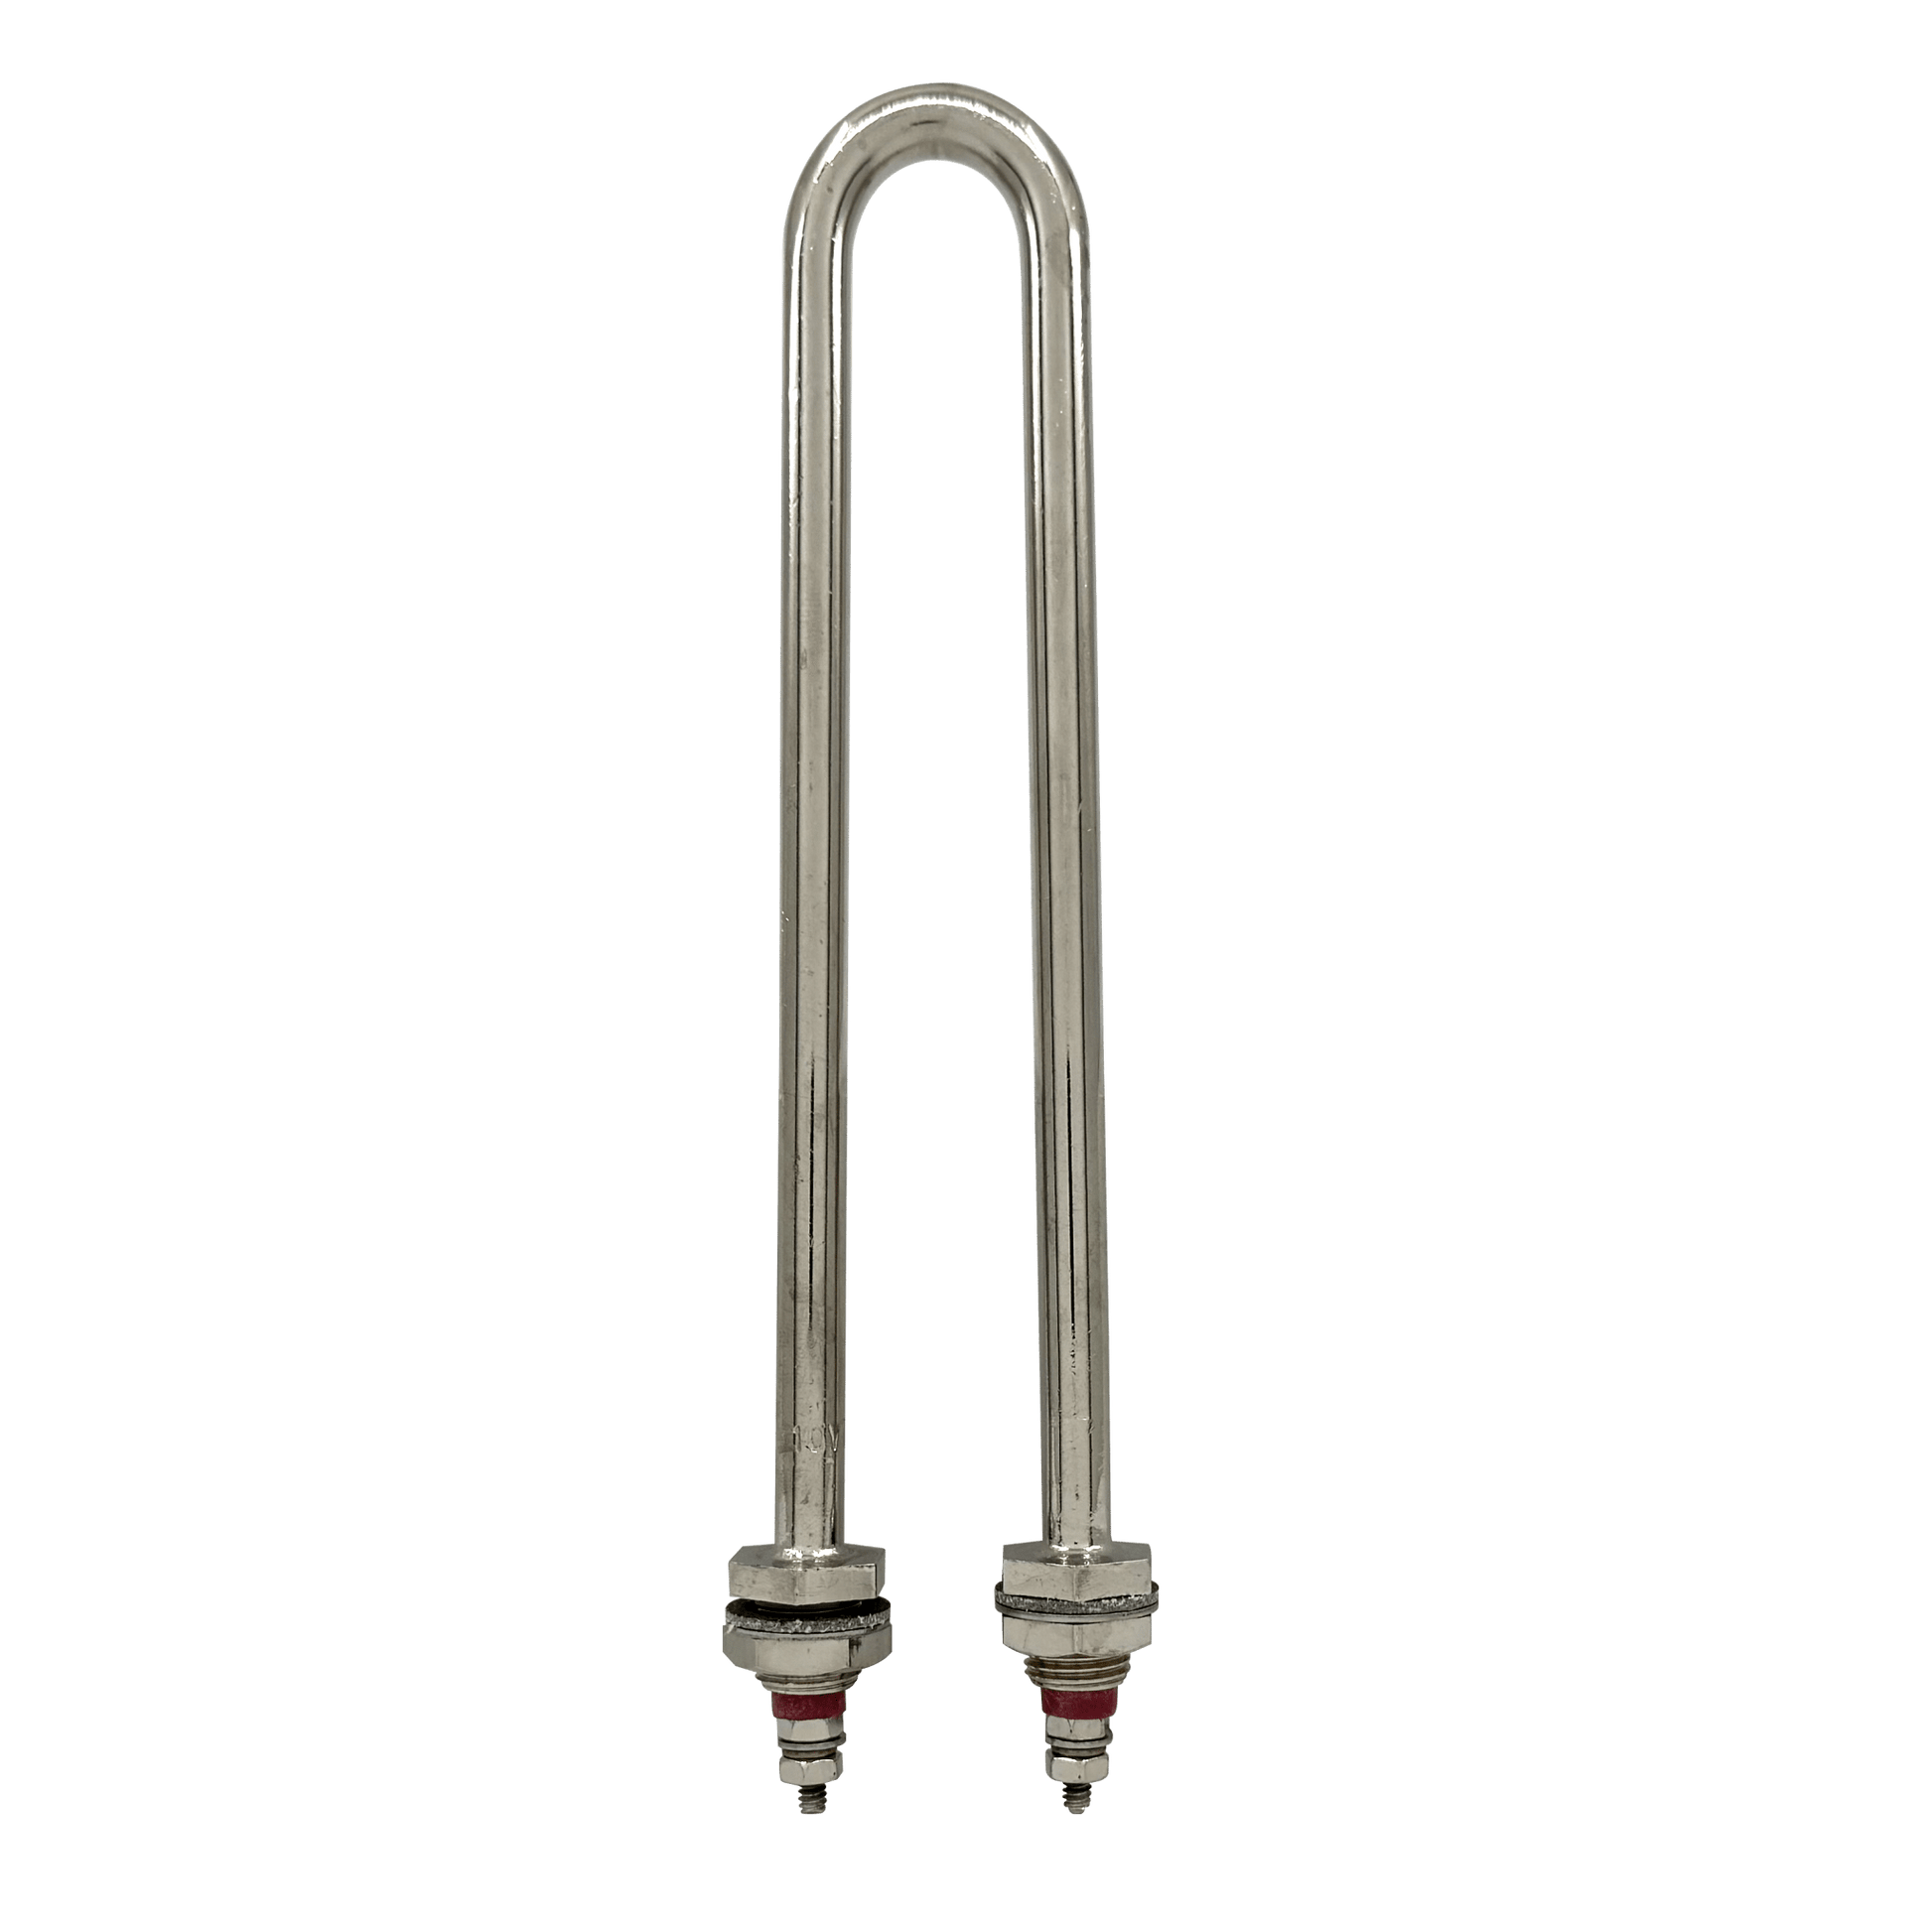 S10 Heating Element - W.S. Industries, Inc.